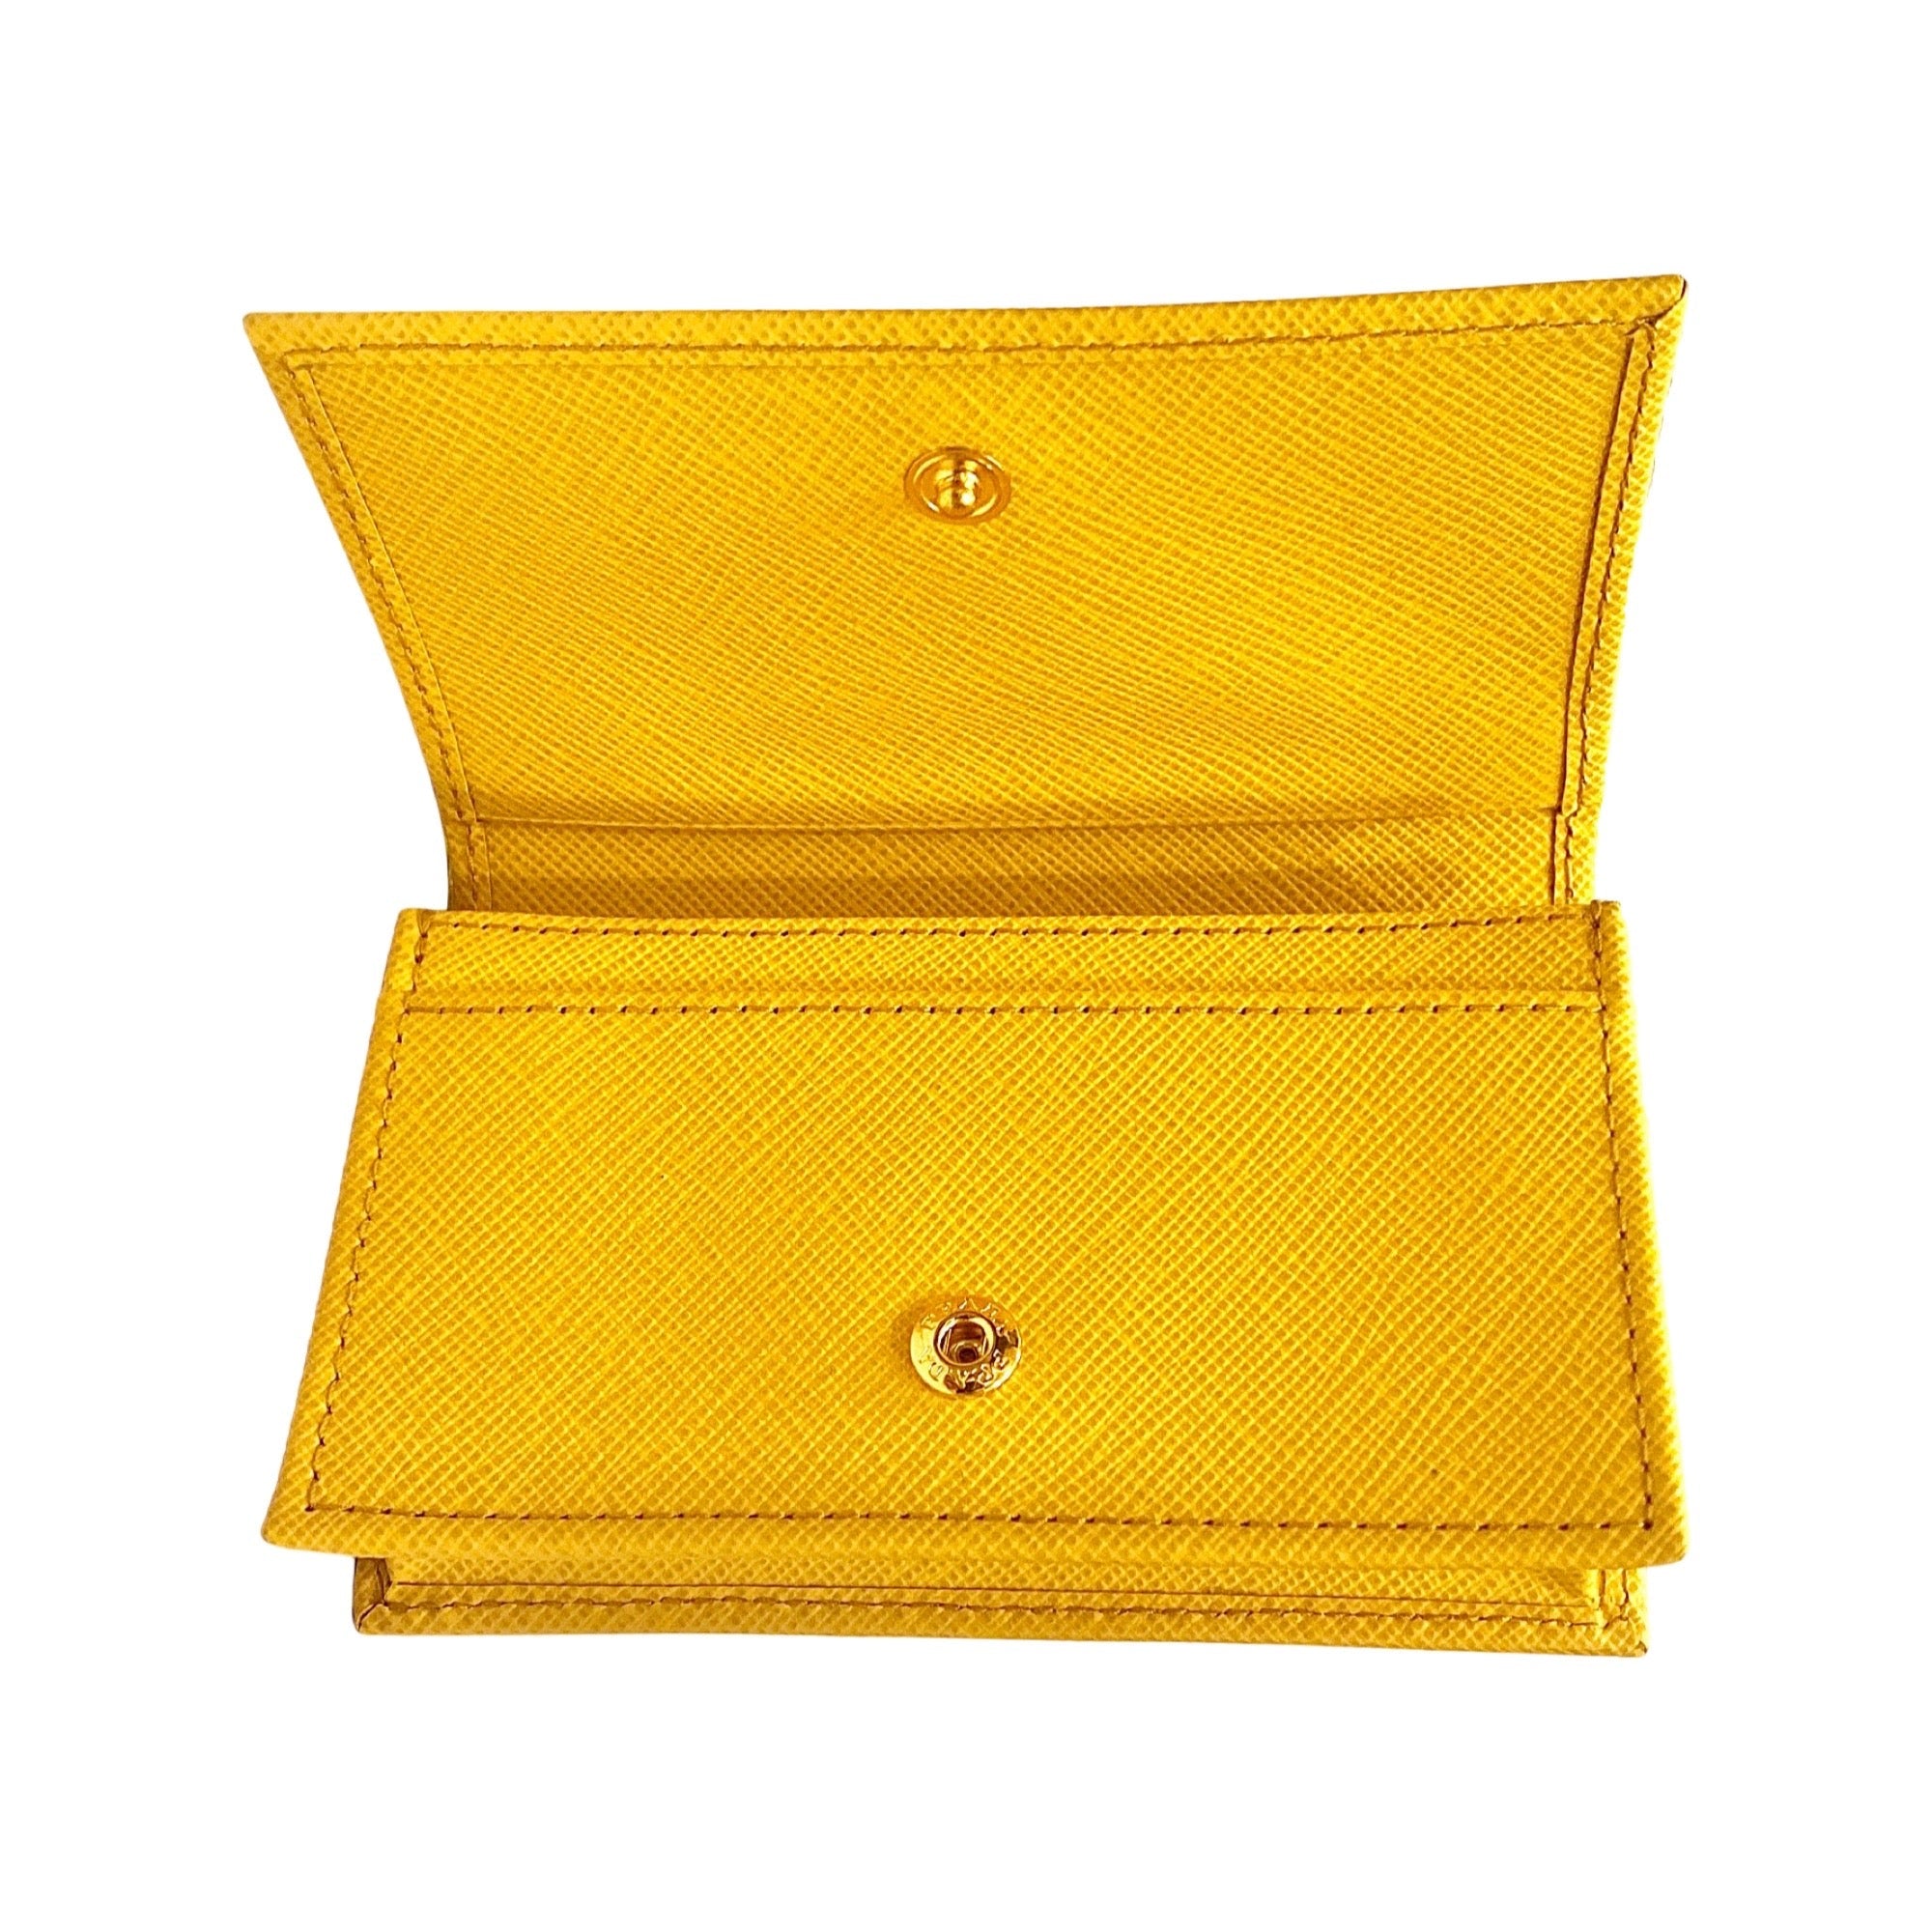 Prada Saffiano Yellow Leather Card Case Wallet 1MC122 at_Queen_Bee_of_Beverly_Hills